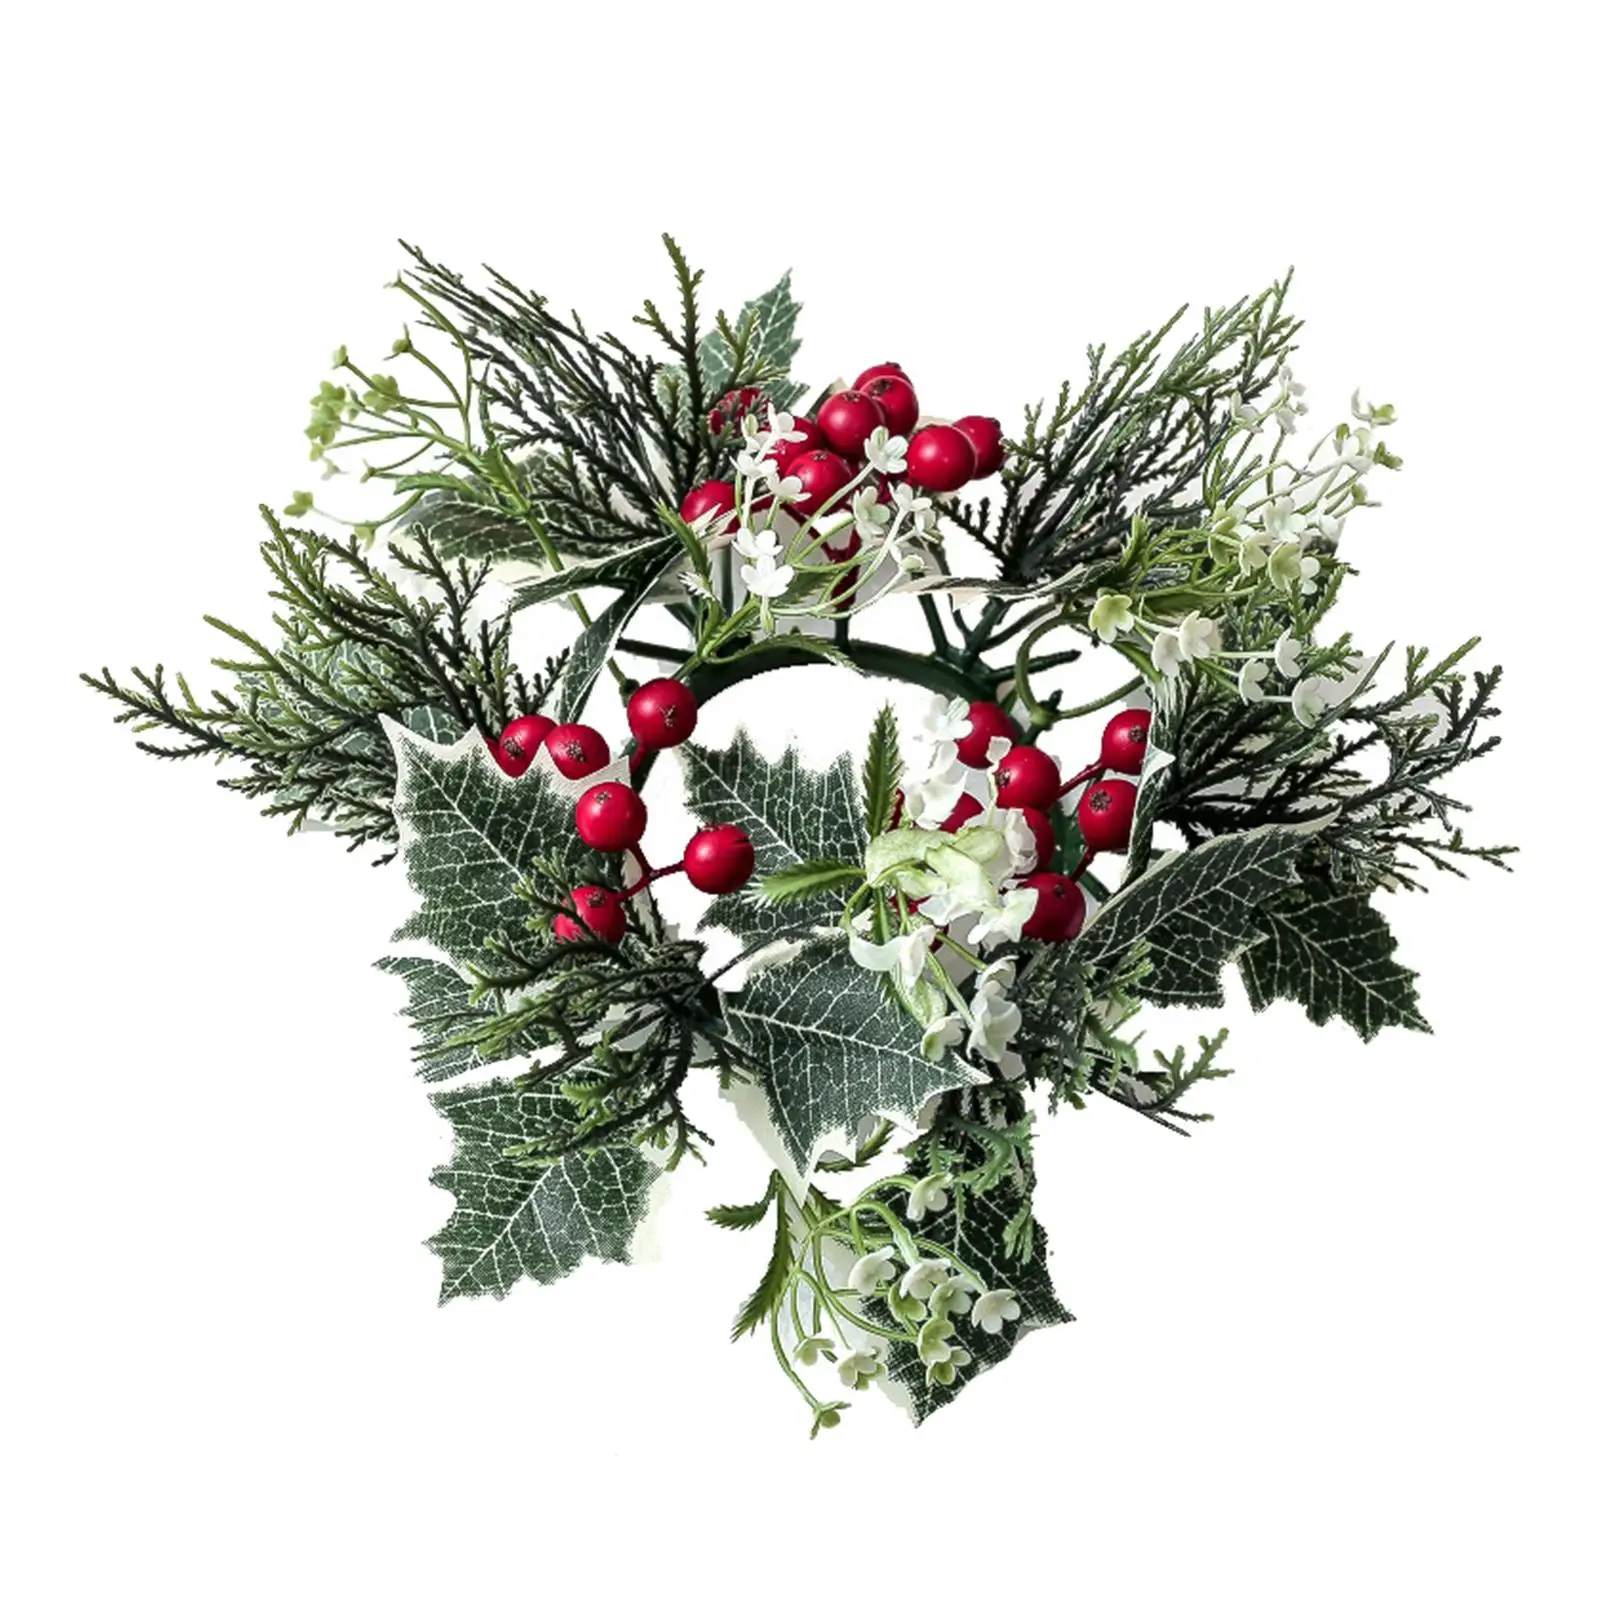 20cm Candle Rings Wreath Table Centerpiece Greenery Candleholders Wreaths for Wedding, Easter, Festivals, Party, Decoration